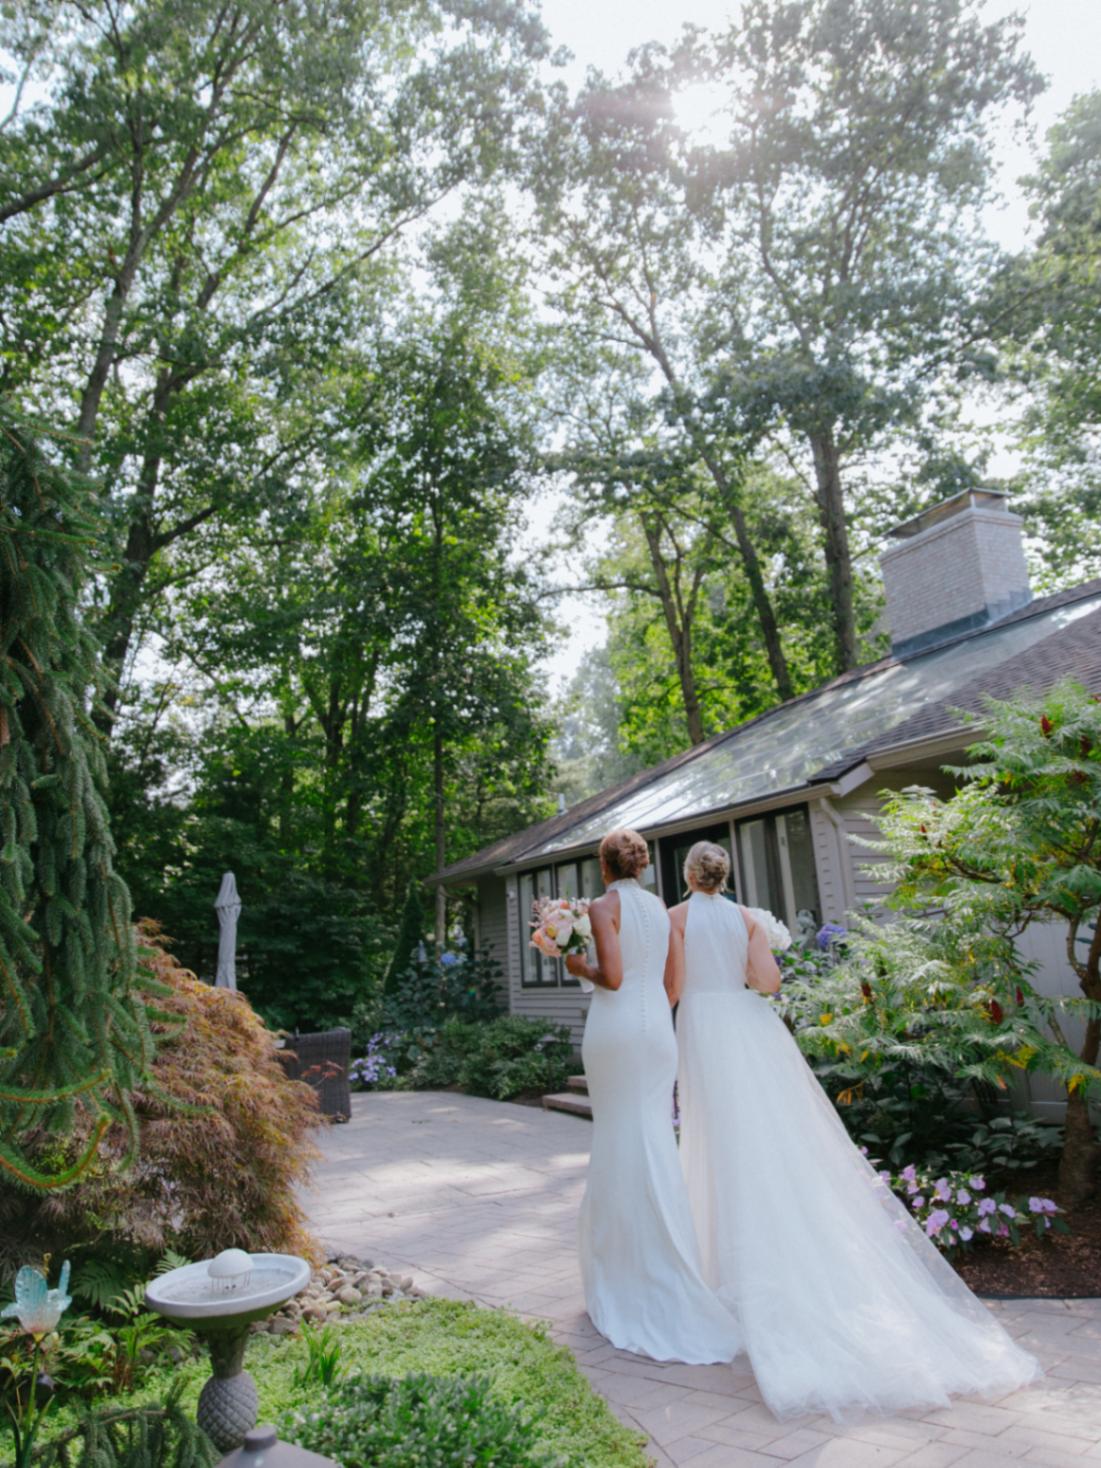 Robin Roberts and Amber Laign, a celebrity lesbian couple, walk on a gray brick path in their Badgley Mischka wedding gowns.